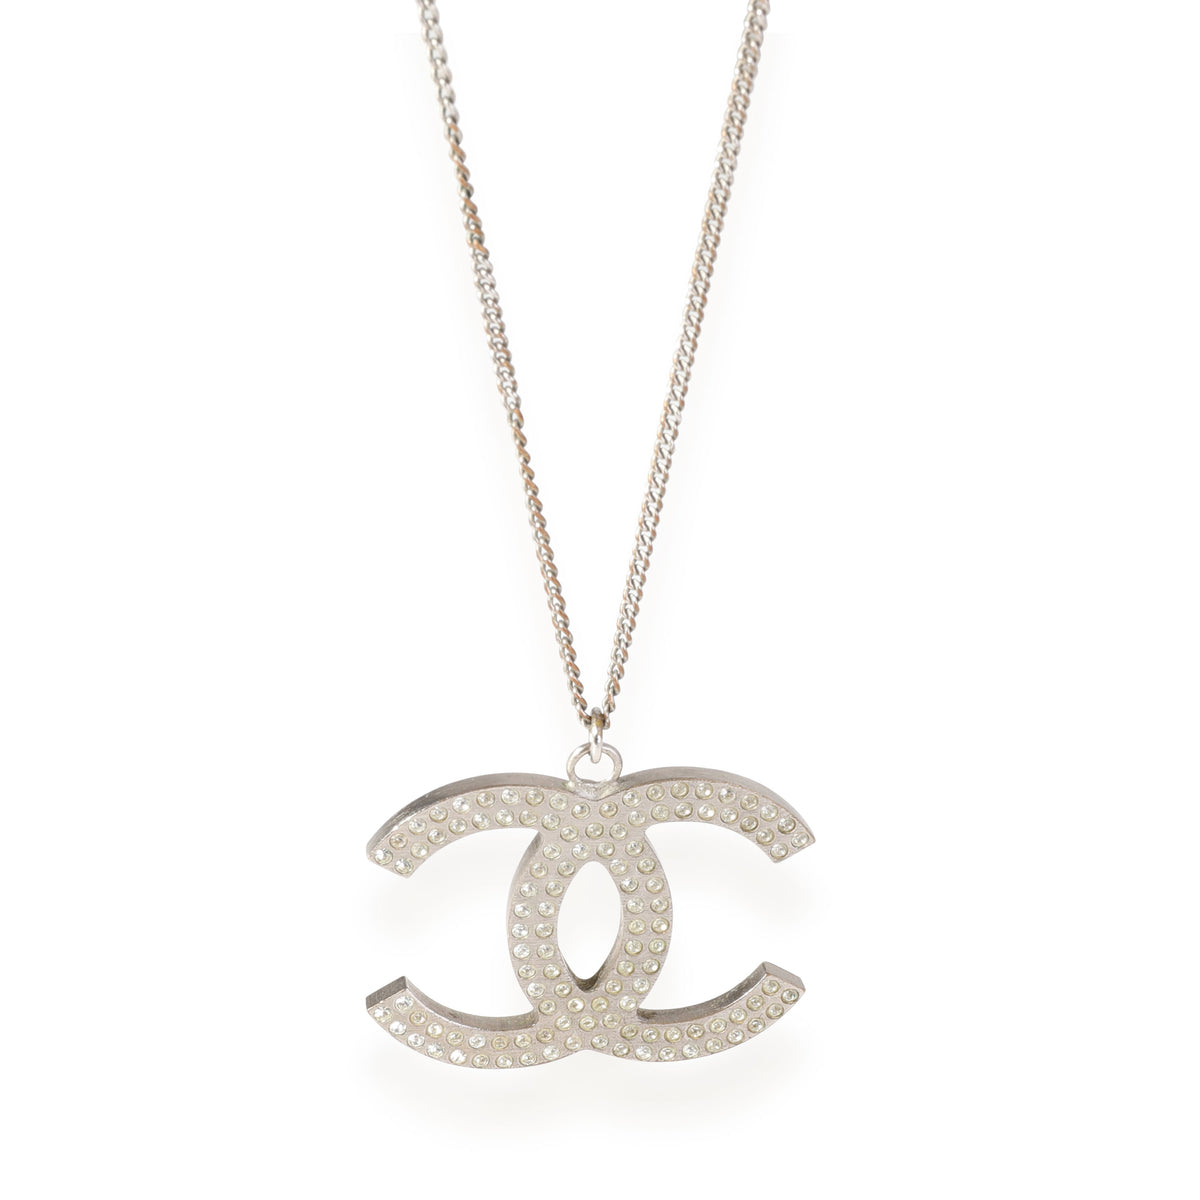 Chanel Silver Tone CC Pendant with Strass